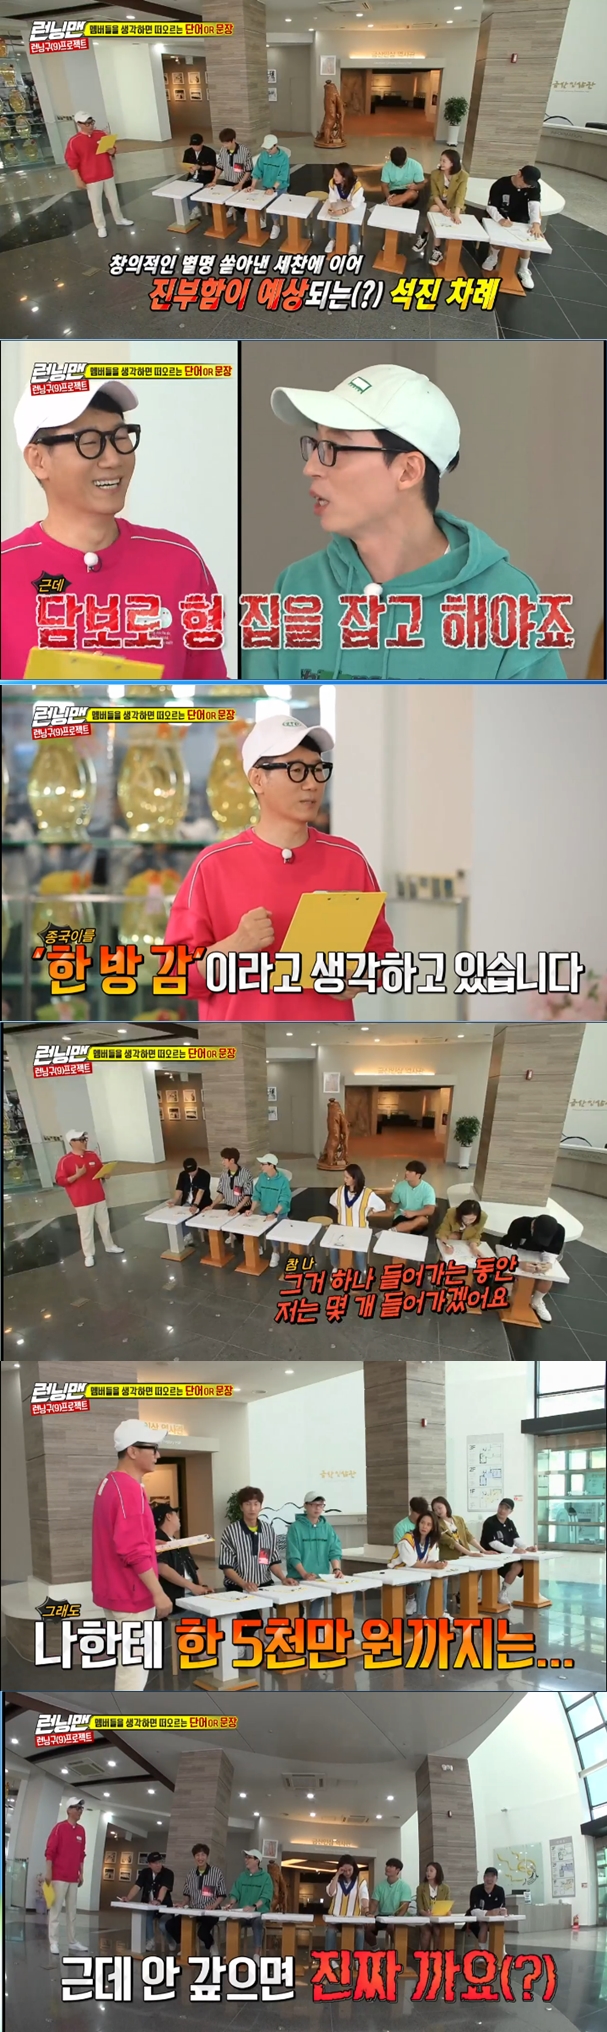 Ji Suk-jin provokes Kim Jong-kookIn the SBS entertainment program Running Man broadcasted on the afternoon of the 16th, the members had time to write the words and sentences that came to mind when they thought about each other at the request of the production team.As Ji Suk-jin stepped forward to make the announcement, Yoo Jae-Suk said, It is already expected to eat.Ji Suk-jin defined Yoo Jae-Suk as Yoo Jae-Suk is a Kahn because of that.However, Ji Suk-jin said, But Jae Seok is a person who can give me 200 million.Yoo Jae-Suk laughed, saying, I will lend you a house, but I will take it as collateral.Ji Suk-jin then confessed Kim Jong-kook as actually a sense of herbalism.Kim Jong-kook, who was usually teased by Honeys fist, gave a smile to Ji Suk-jins provocation, saying, I will go in a few while I go in.